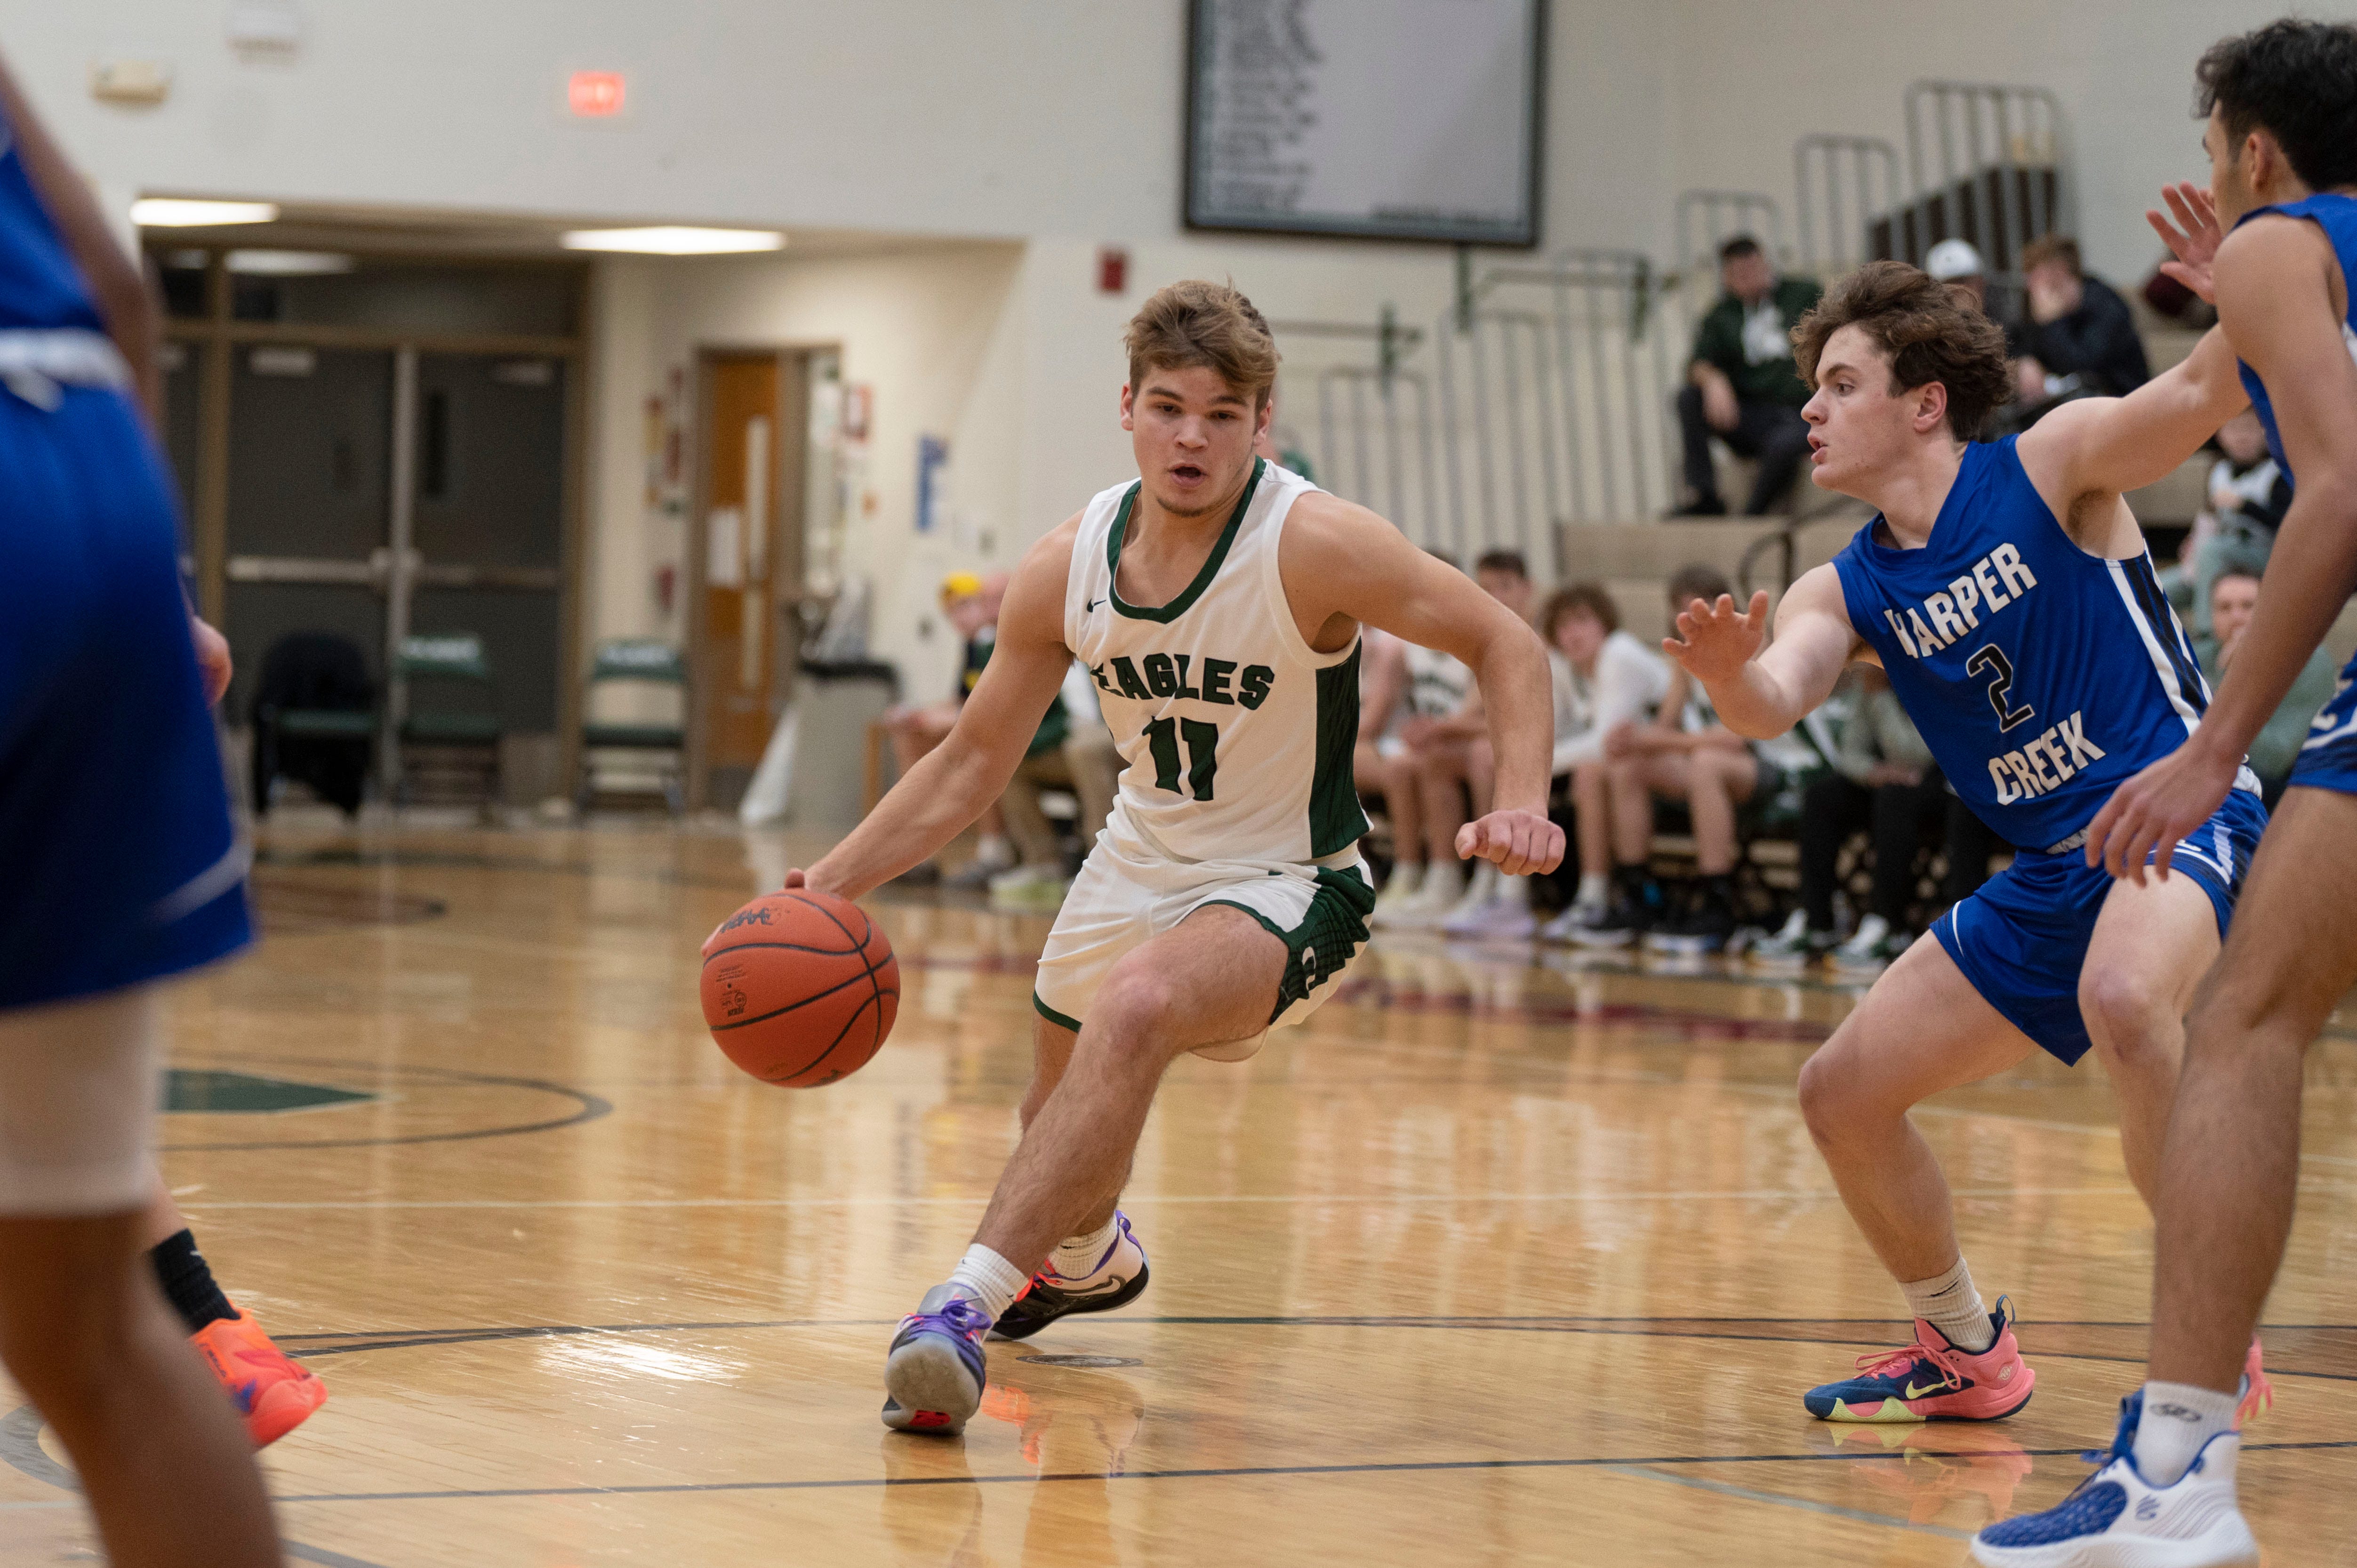 Boys basketball roundup: Olivet stays perfect with key GLAC victory